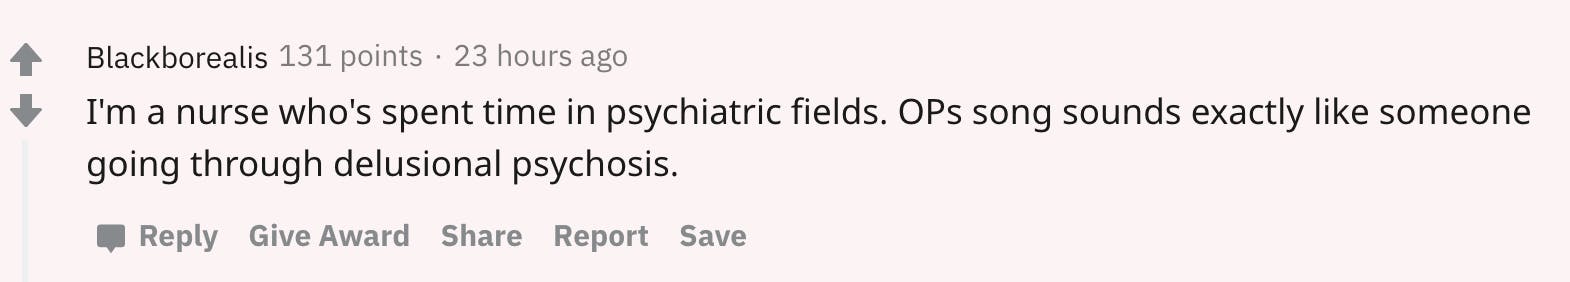 reddit comment saying "I'm a nurse who's spent time in psychiatric fields. OPs song sounds exactly like someone going through delusional psychosis."